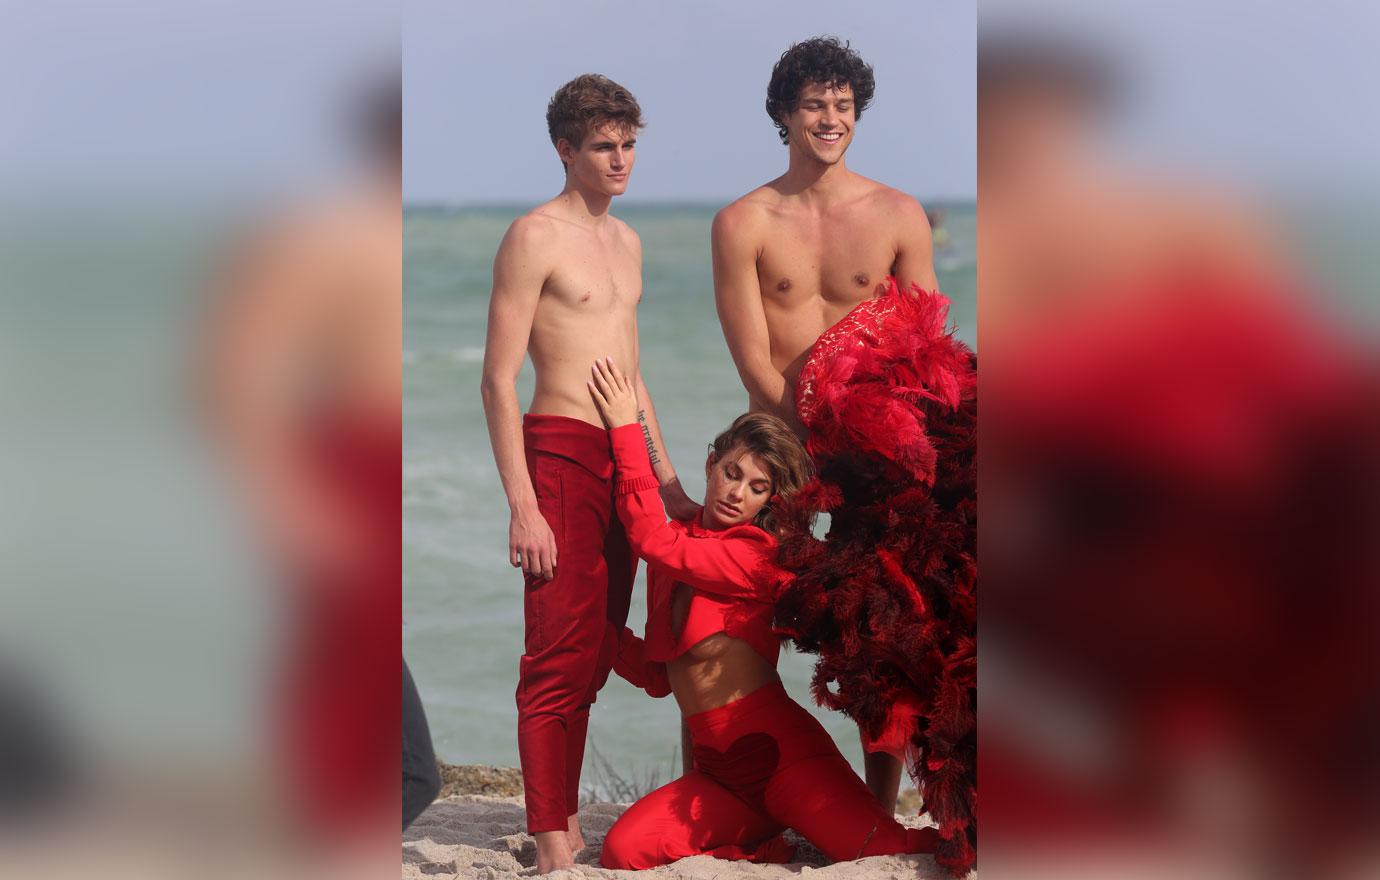 PICS] Presley Gerber Strips Down On The Beach In Miami